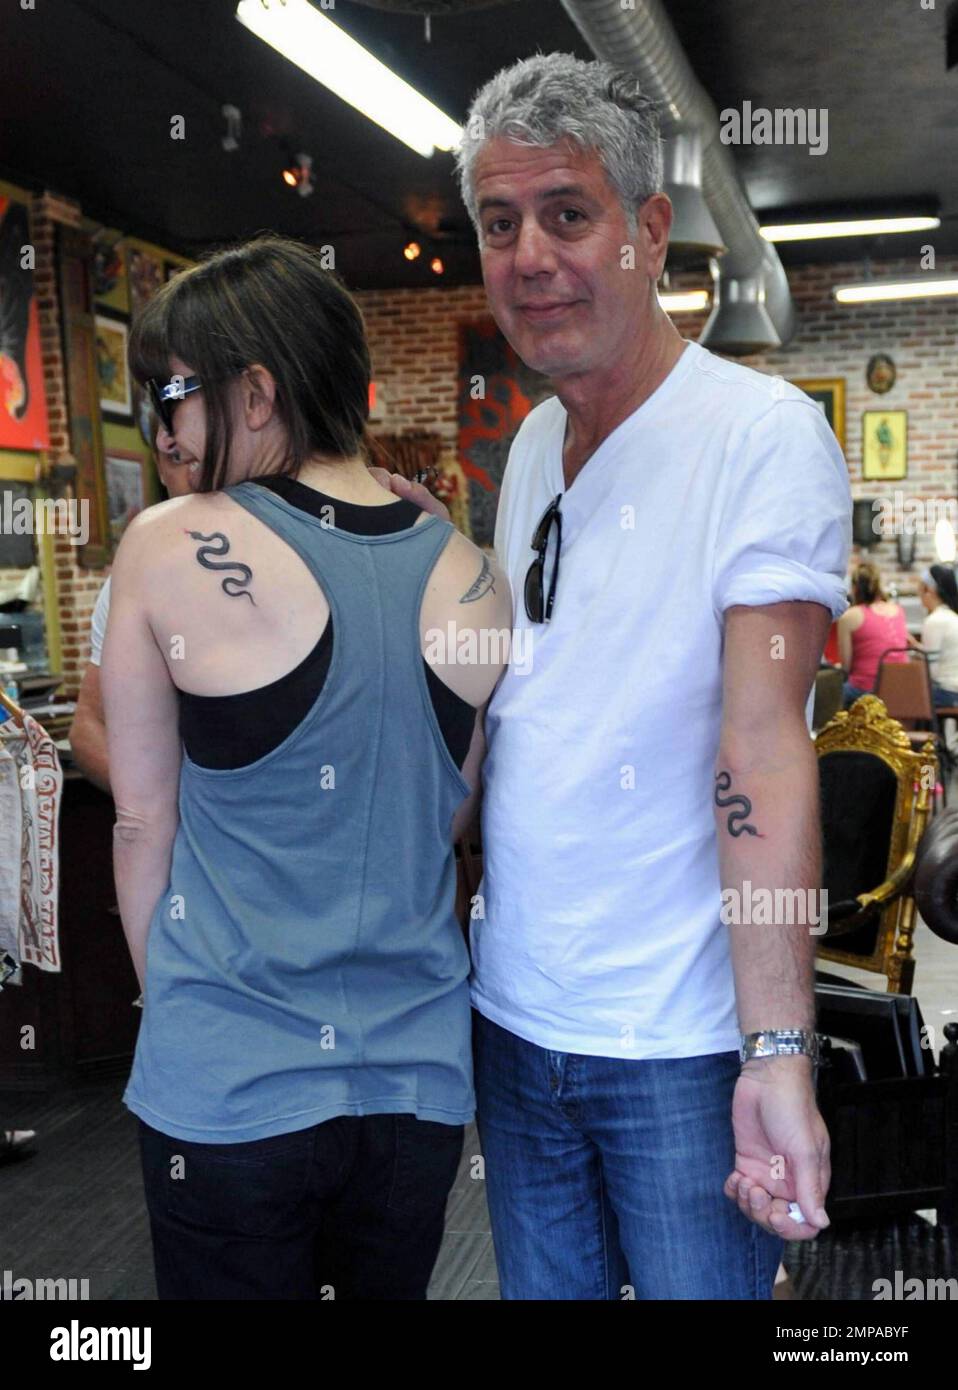 Anthony Bourdain's Mom Is Getting Her First Tattoo In Honor Of The Late Chef